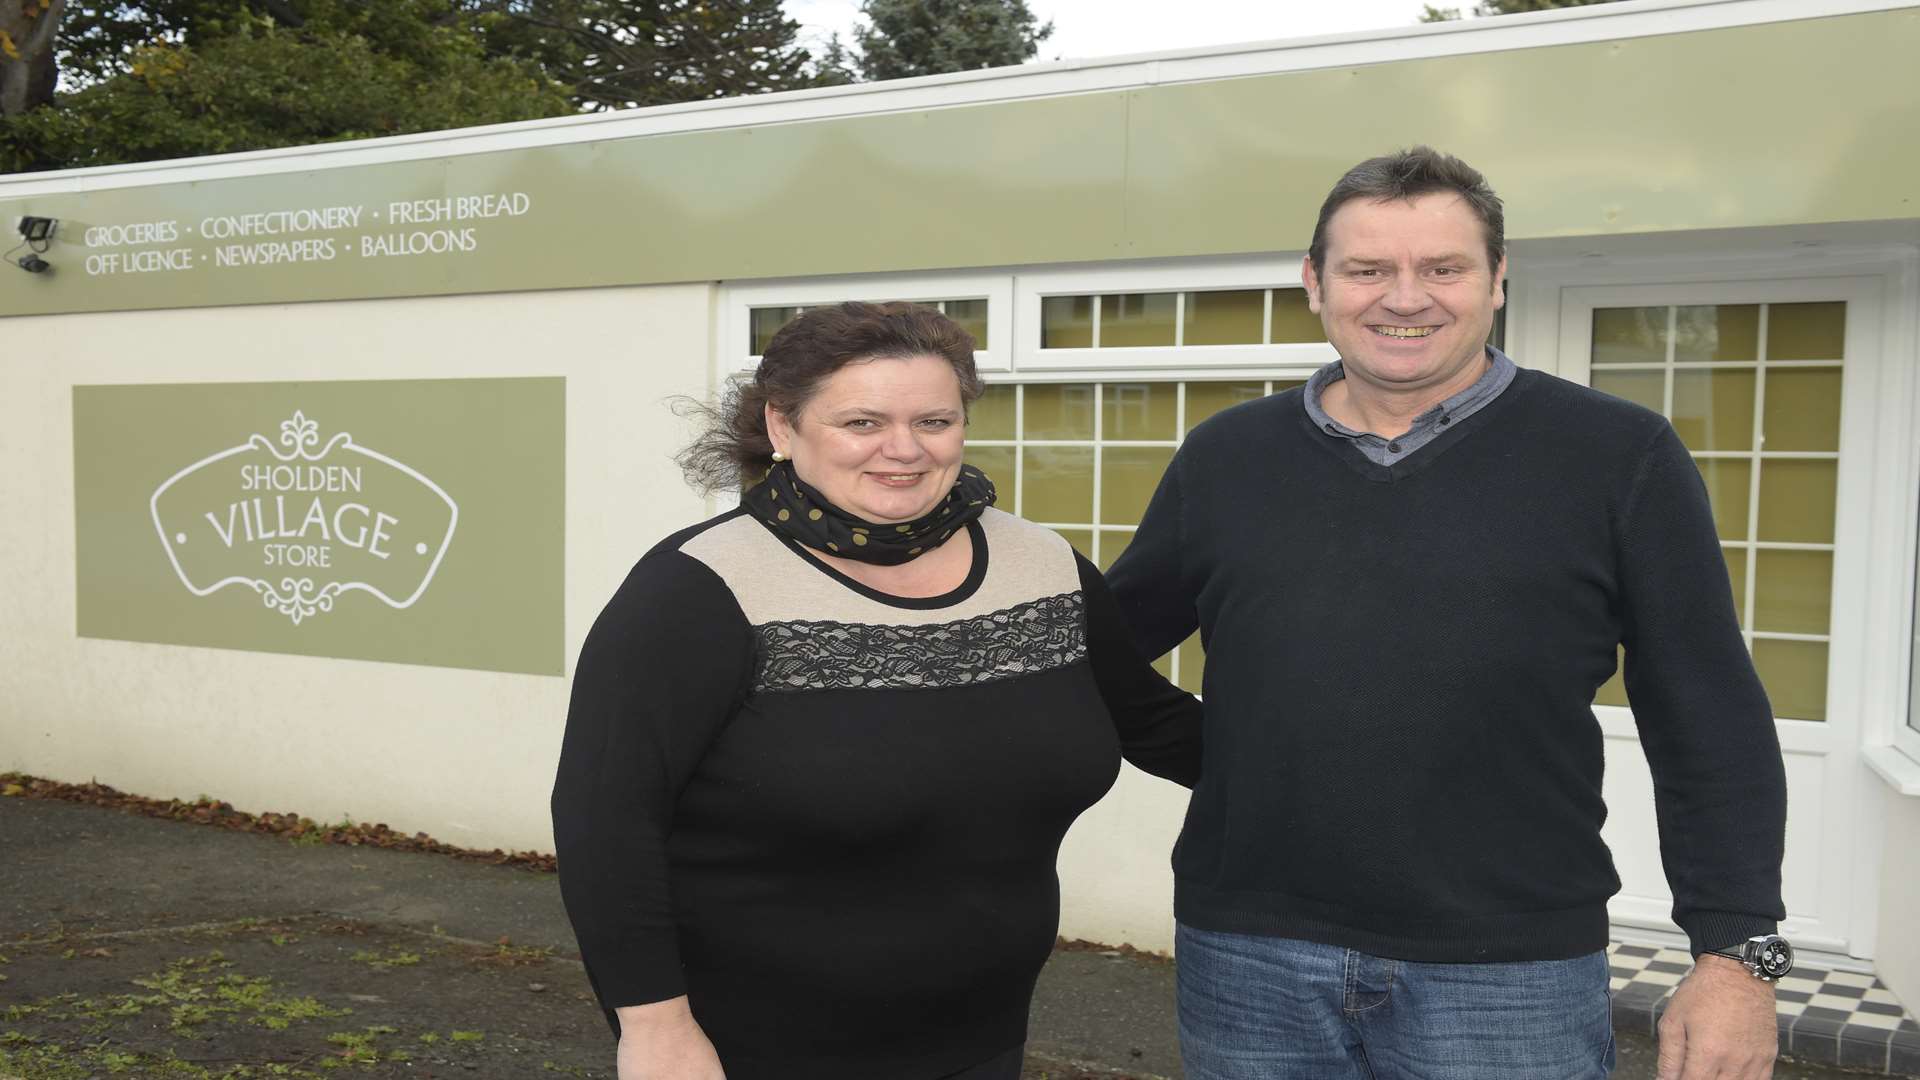 Sylvia and Martin Sims are bringing a village shop back to Sholden